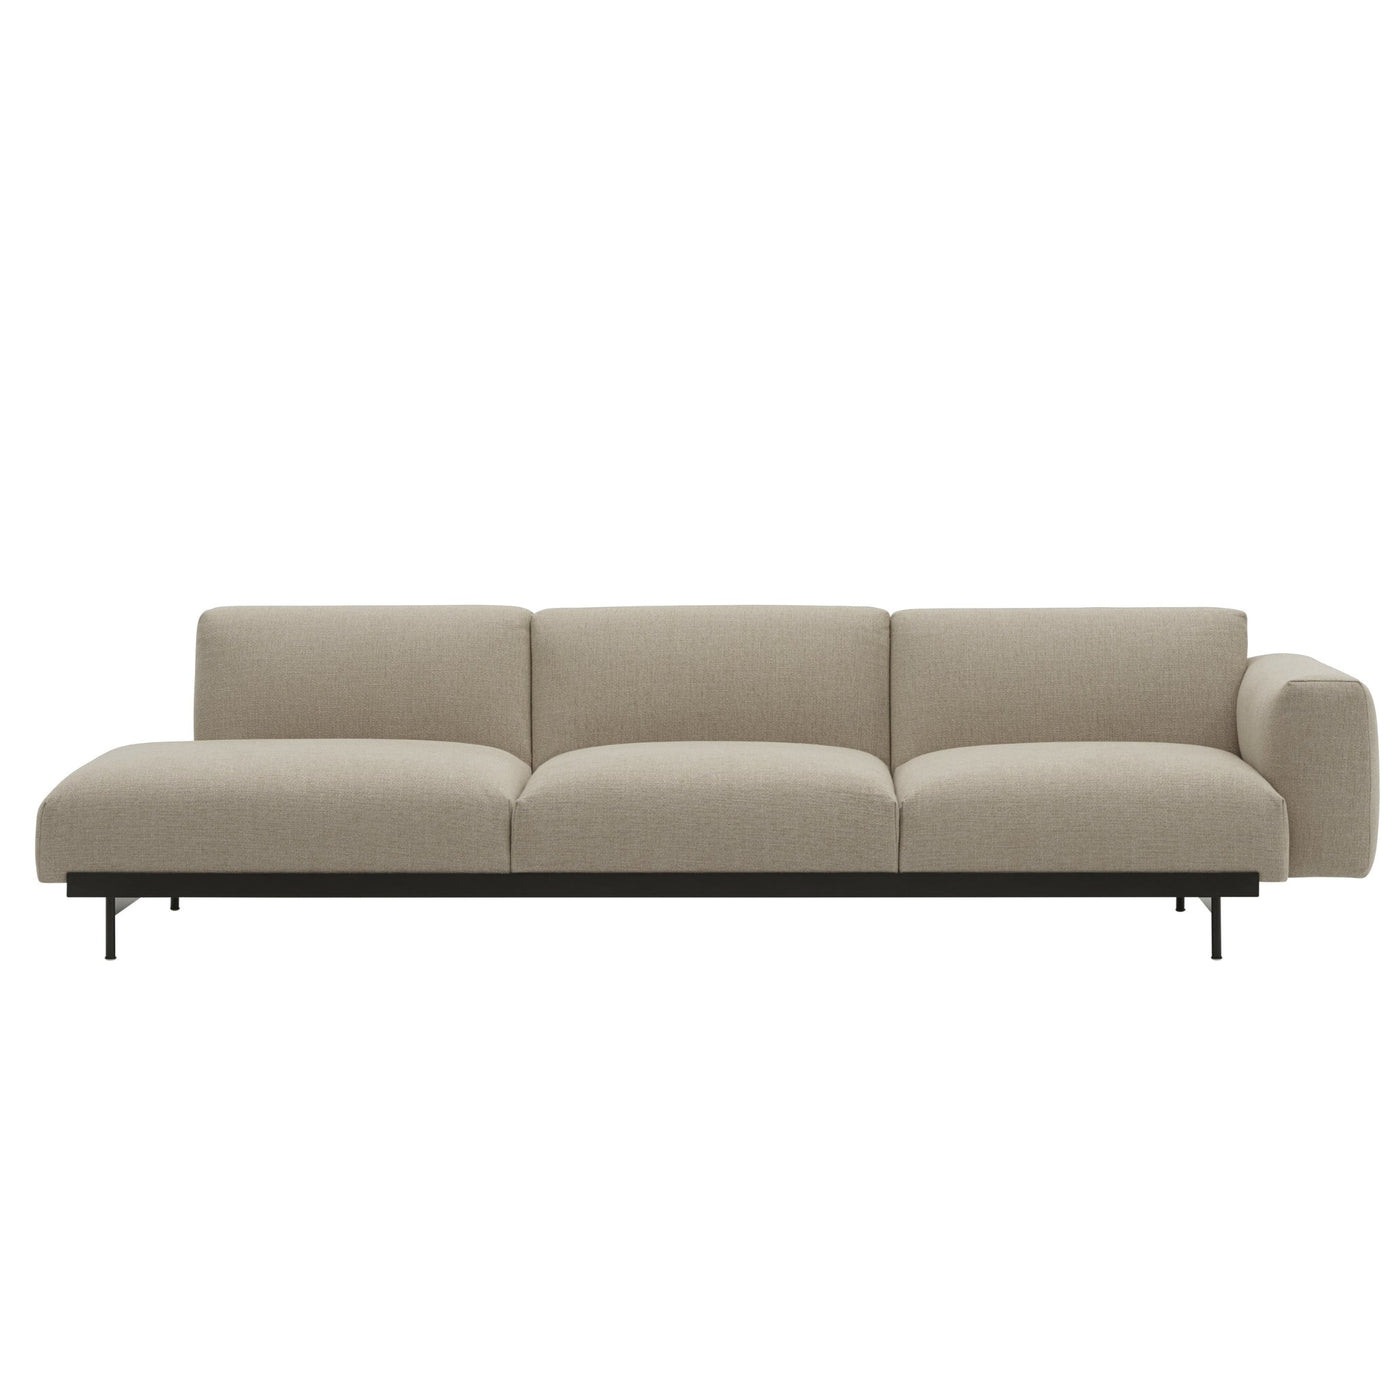 Muuto In Situ Modular 3 Seater Sofa, configuration 2. Made to order from someday designs. #colour_ecriture-240